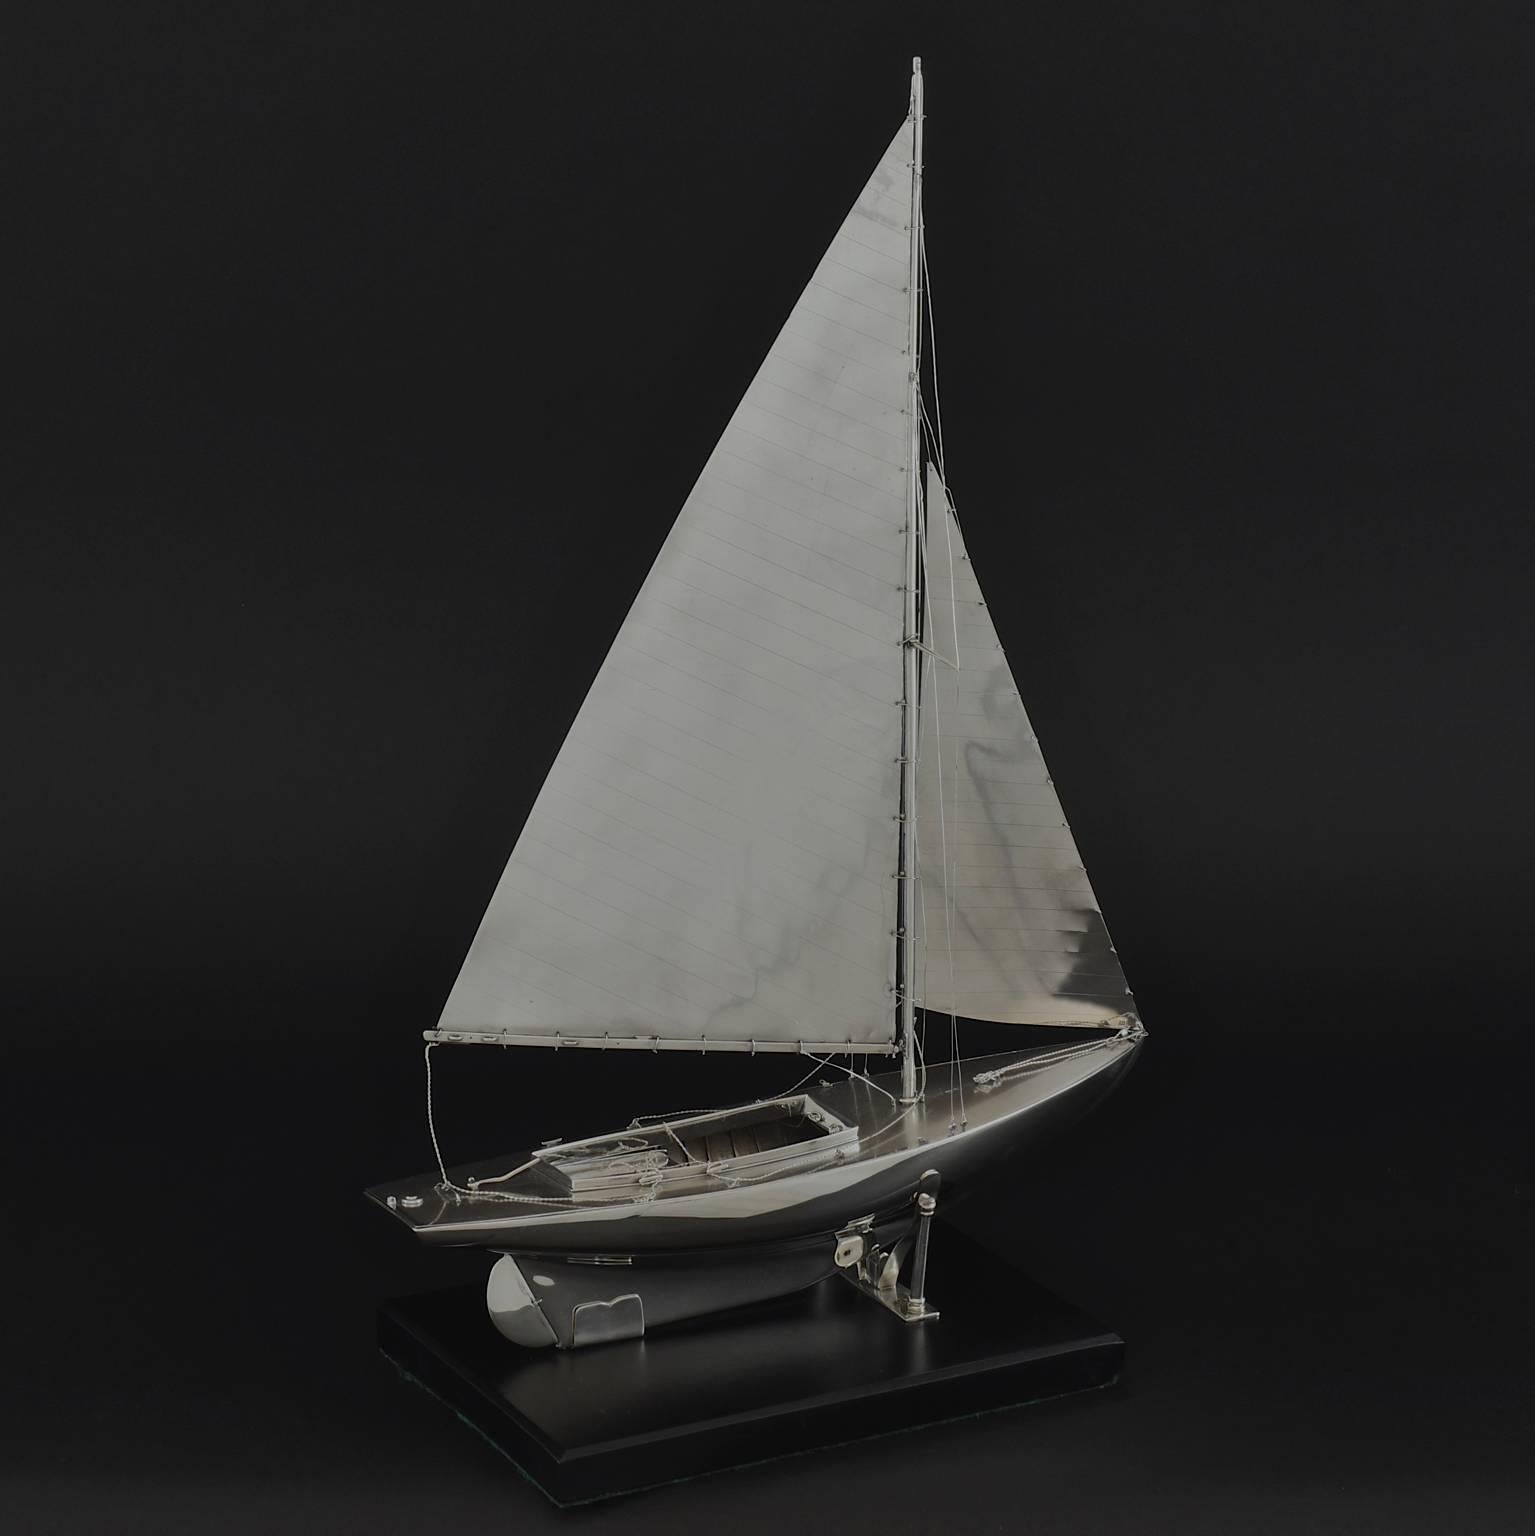 An exceptional, scale model of a Mylne O.D. class yacht made in Sterling silver, hall marked 1935. Beautifully detailed, it even has Sterling silver rigging and sails!

Benzie of Cowes was established in 1862 by the late Mr. Simpson Benzie. Through